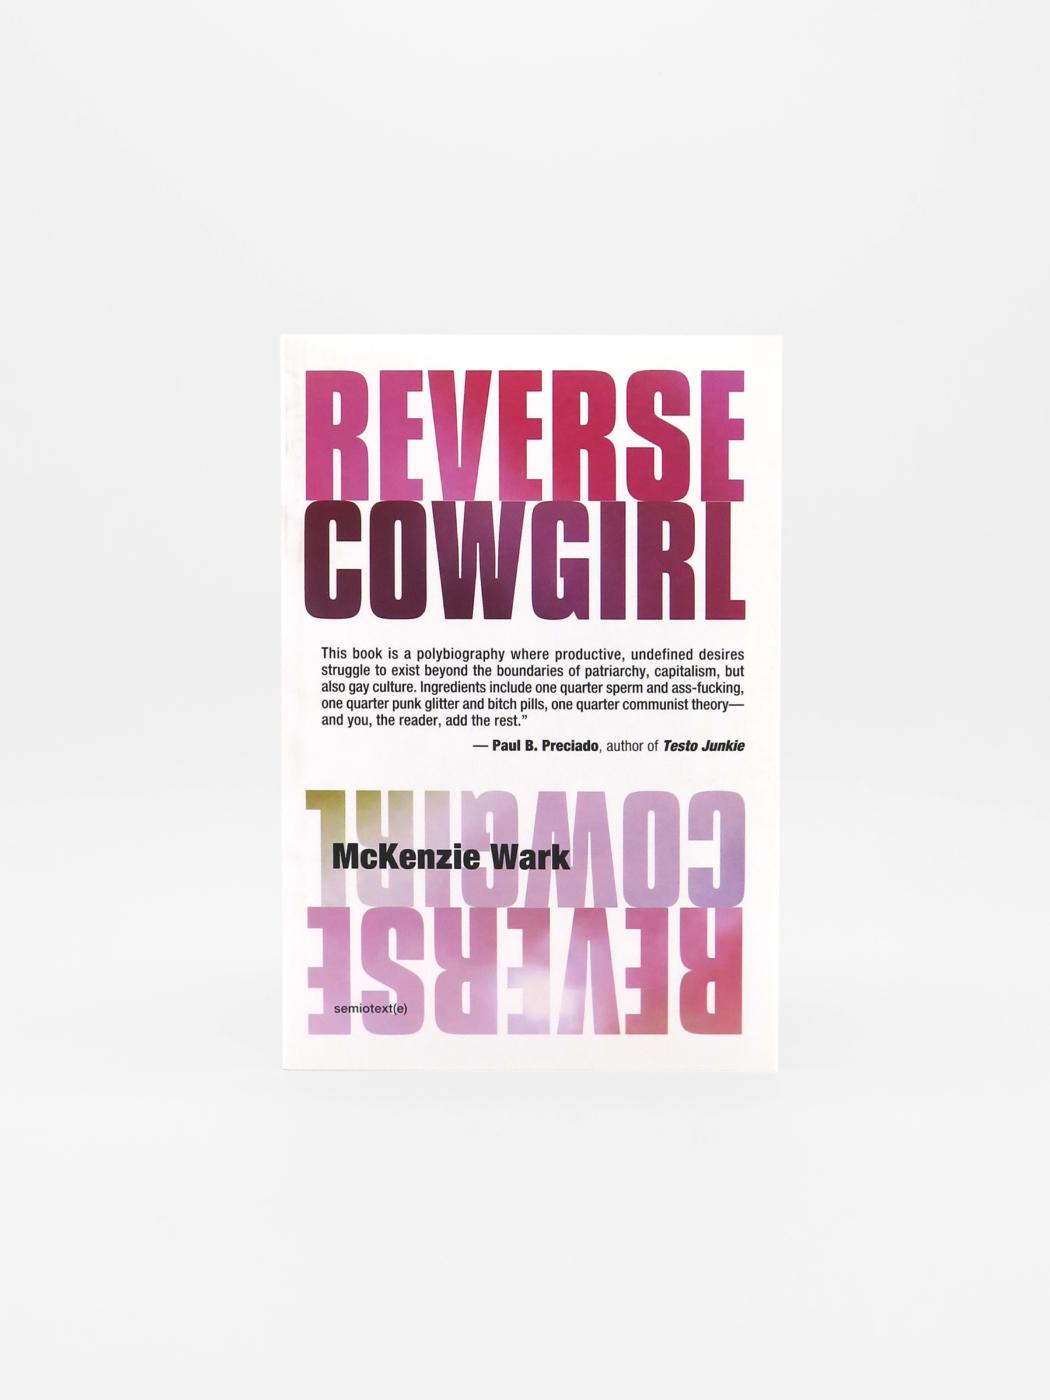 How to perform reverse cowgirl